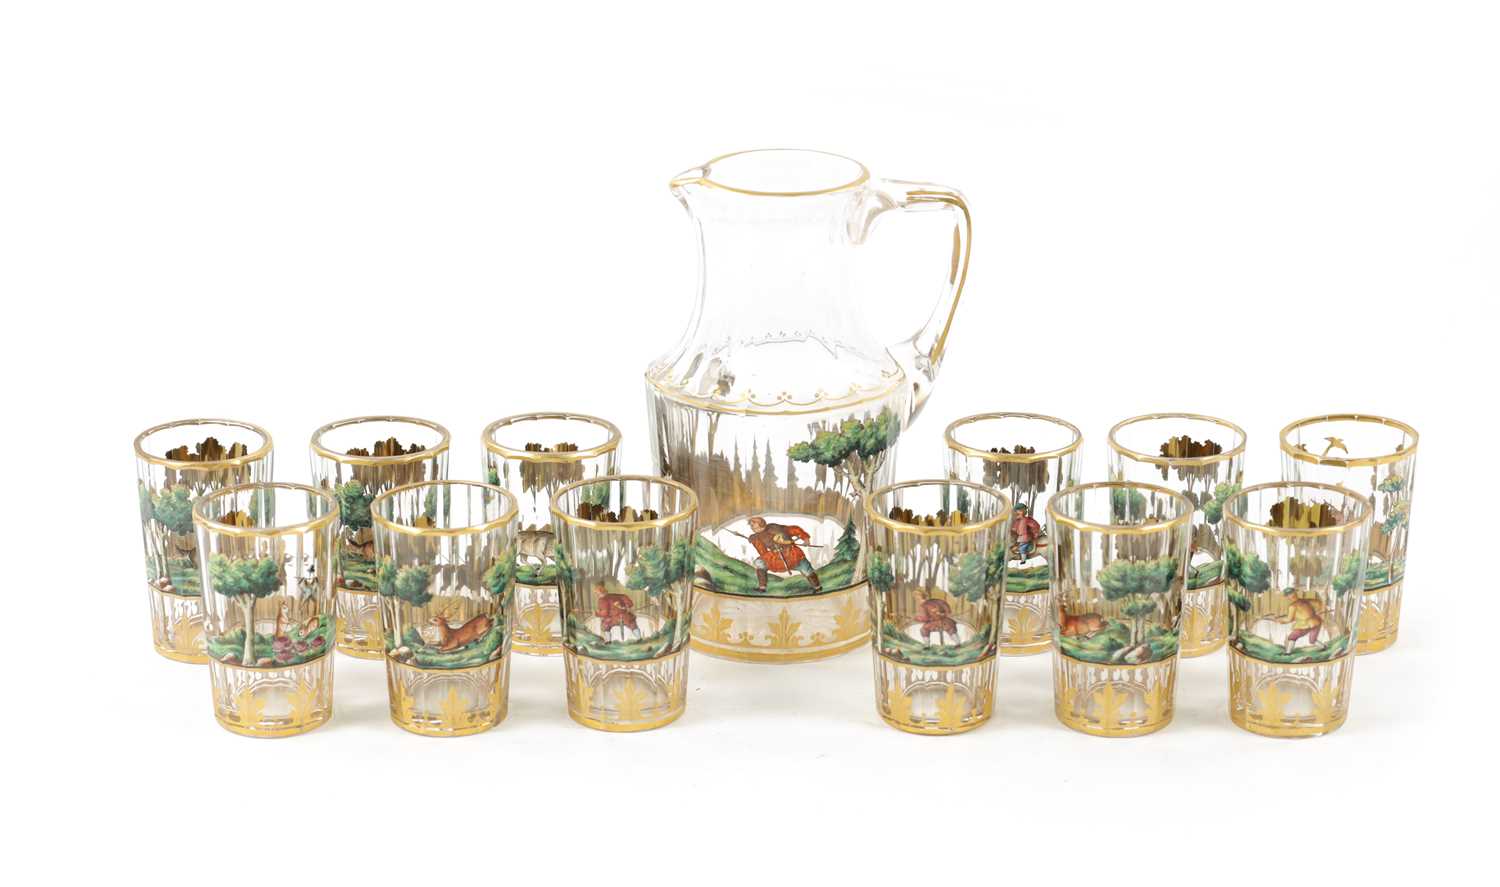 A LATE 19TH CENTURY BOHEMIAN GLASS AND ENAMEL DRINKS SET